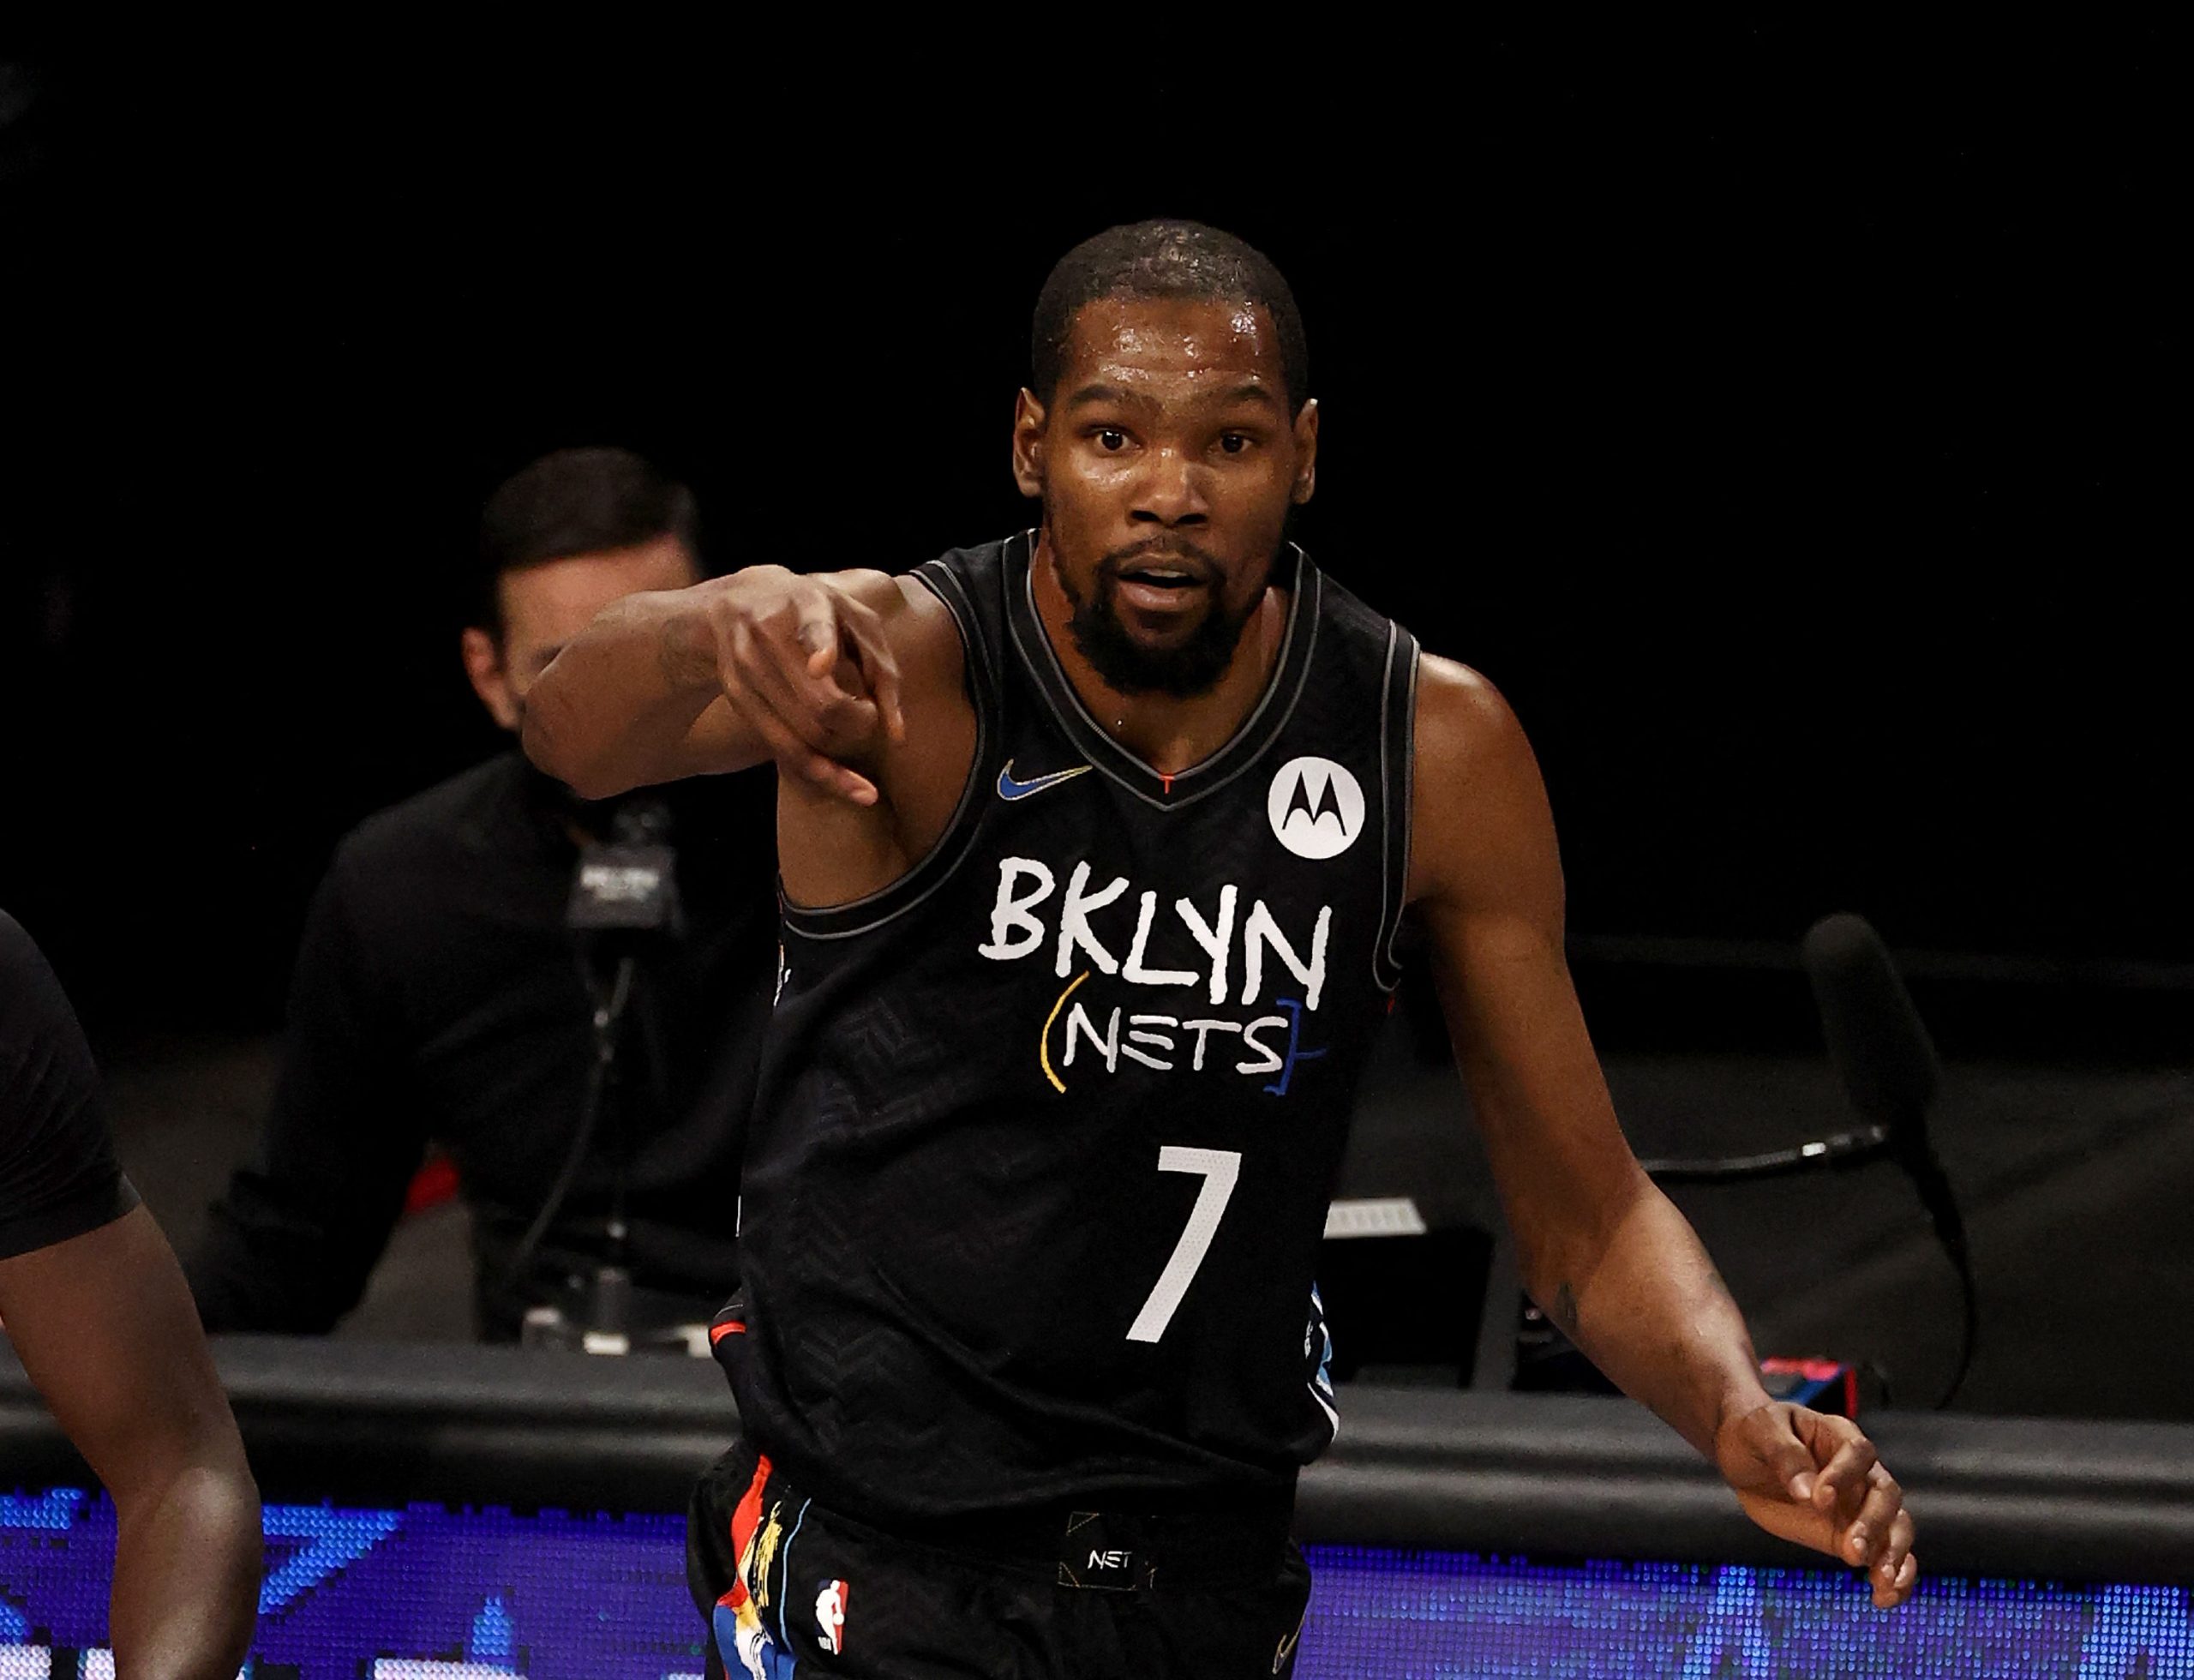 ‘Best player’: Fans react to Kevin Durant’s heroics against Milwaukee Bucks